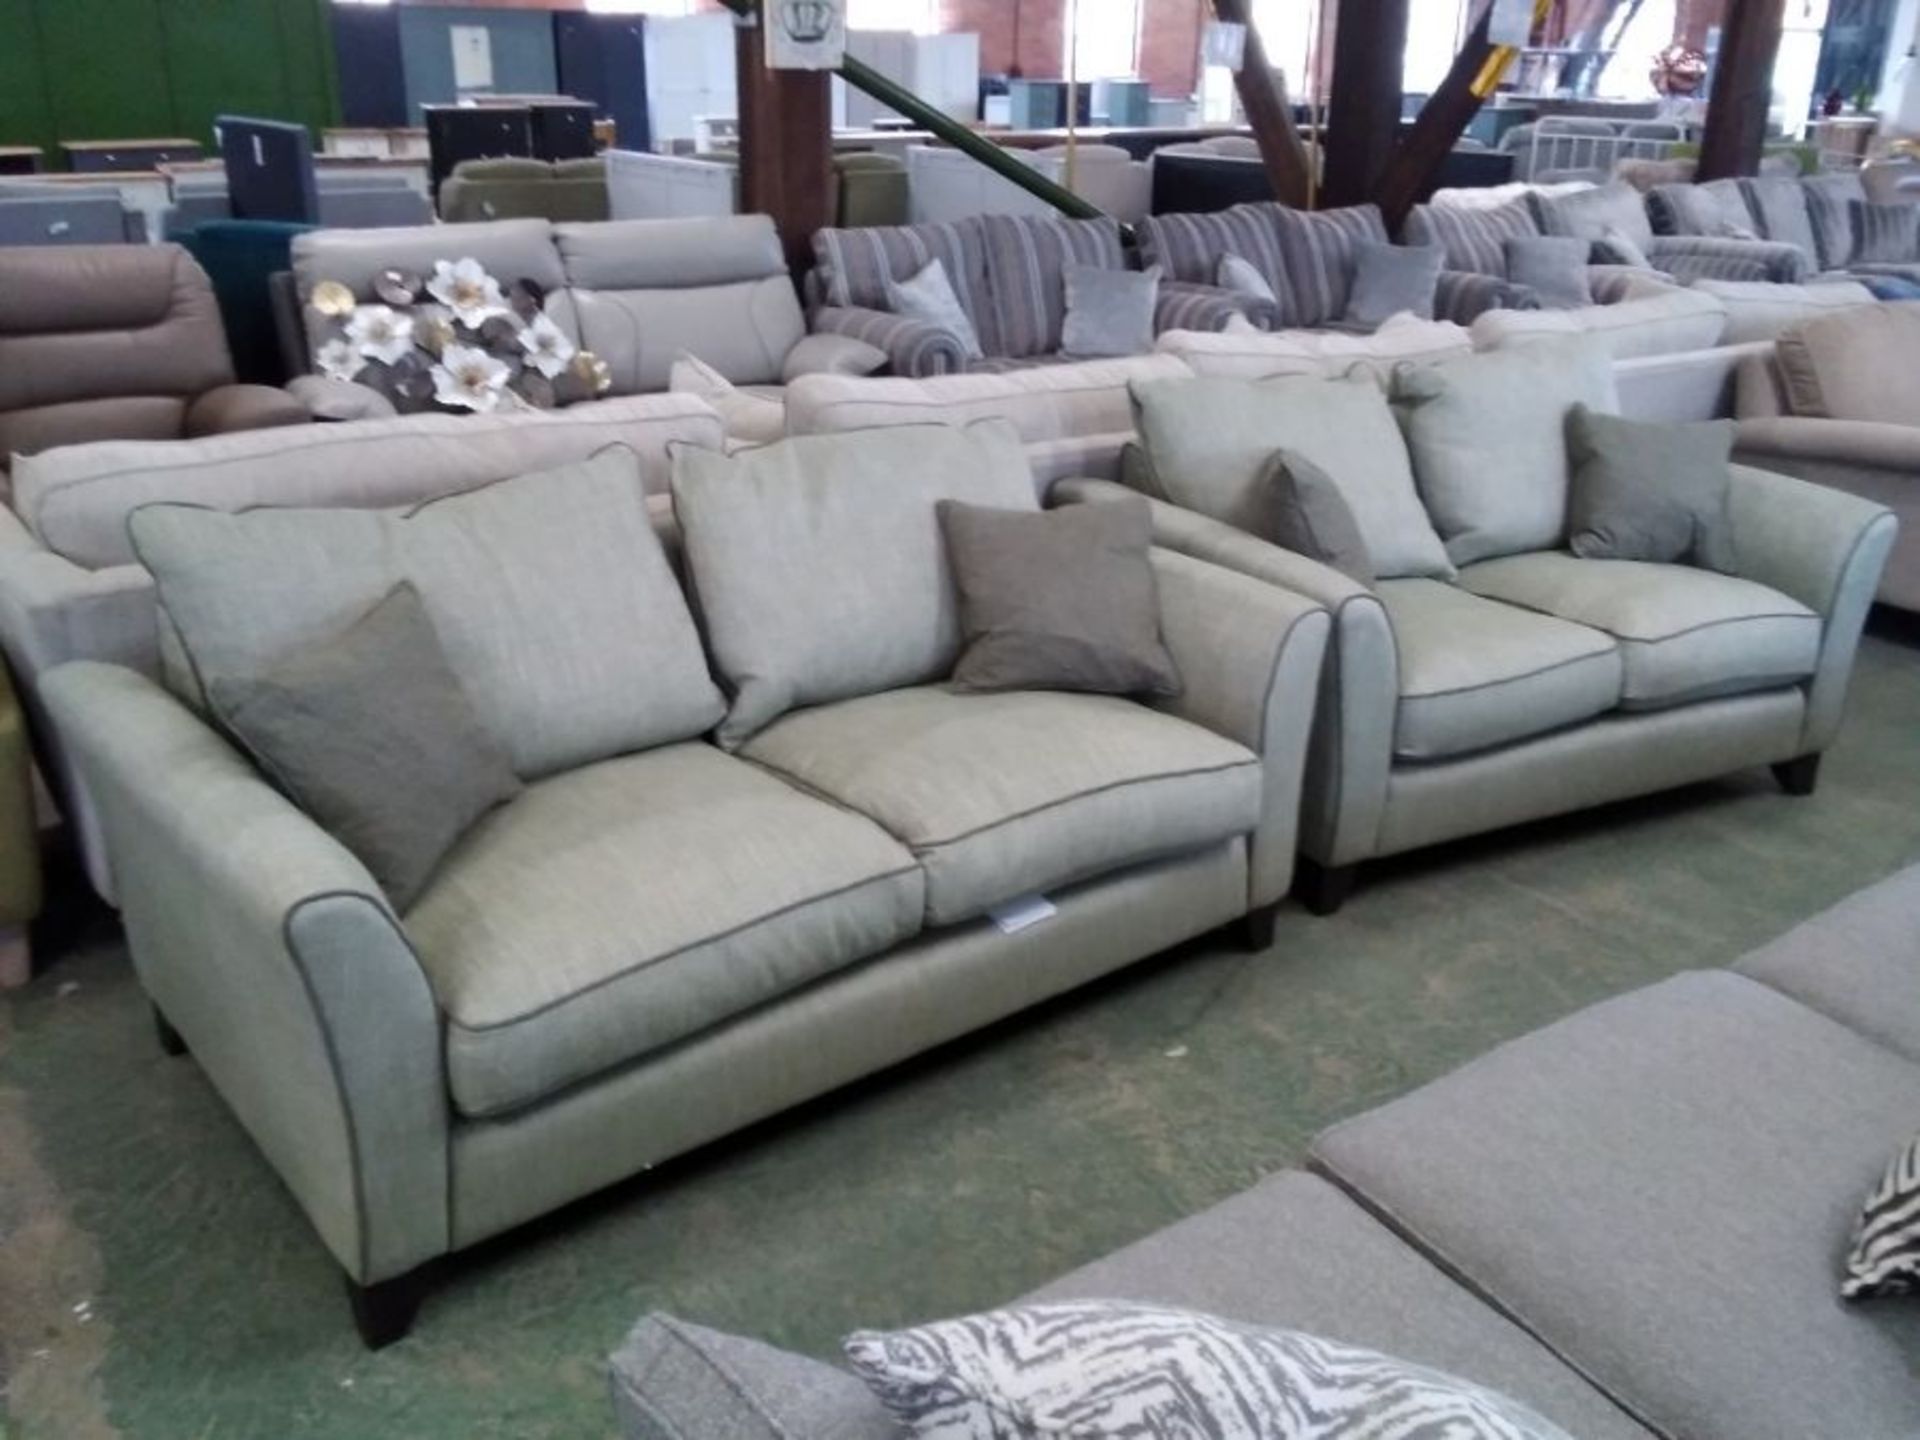 GREEN PATTERNED 3 SEATER AND 2 SEATER (TROO2954-WO